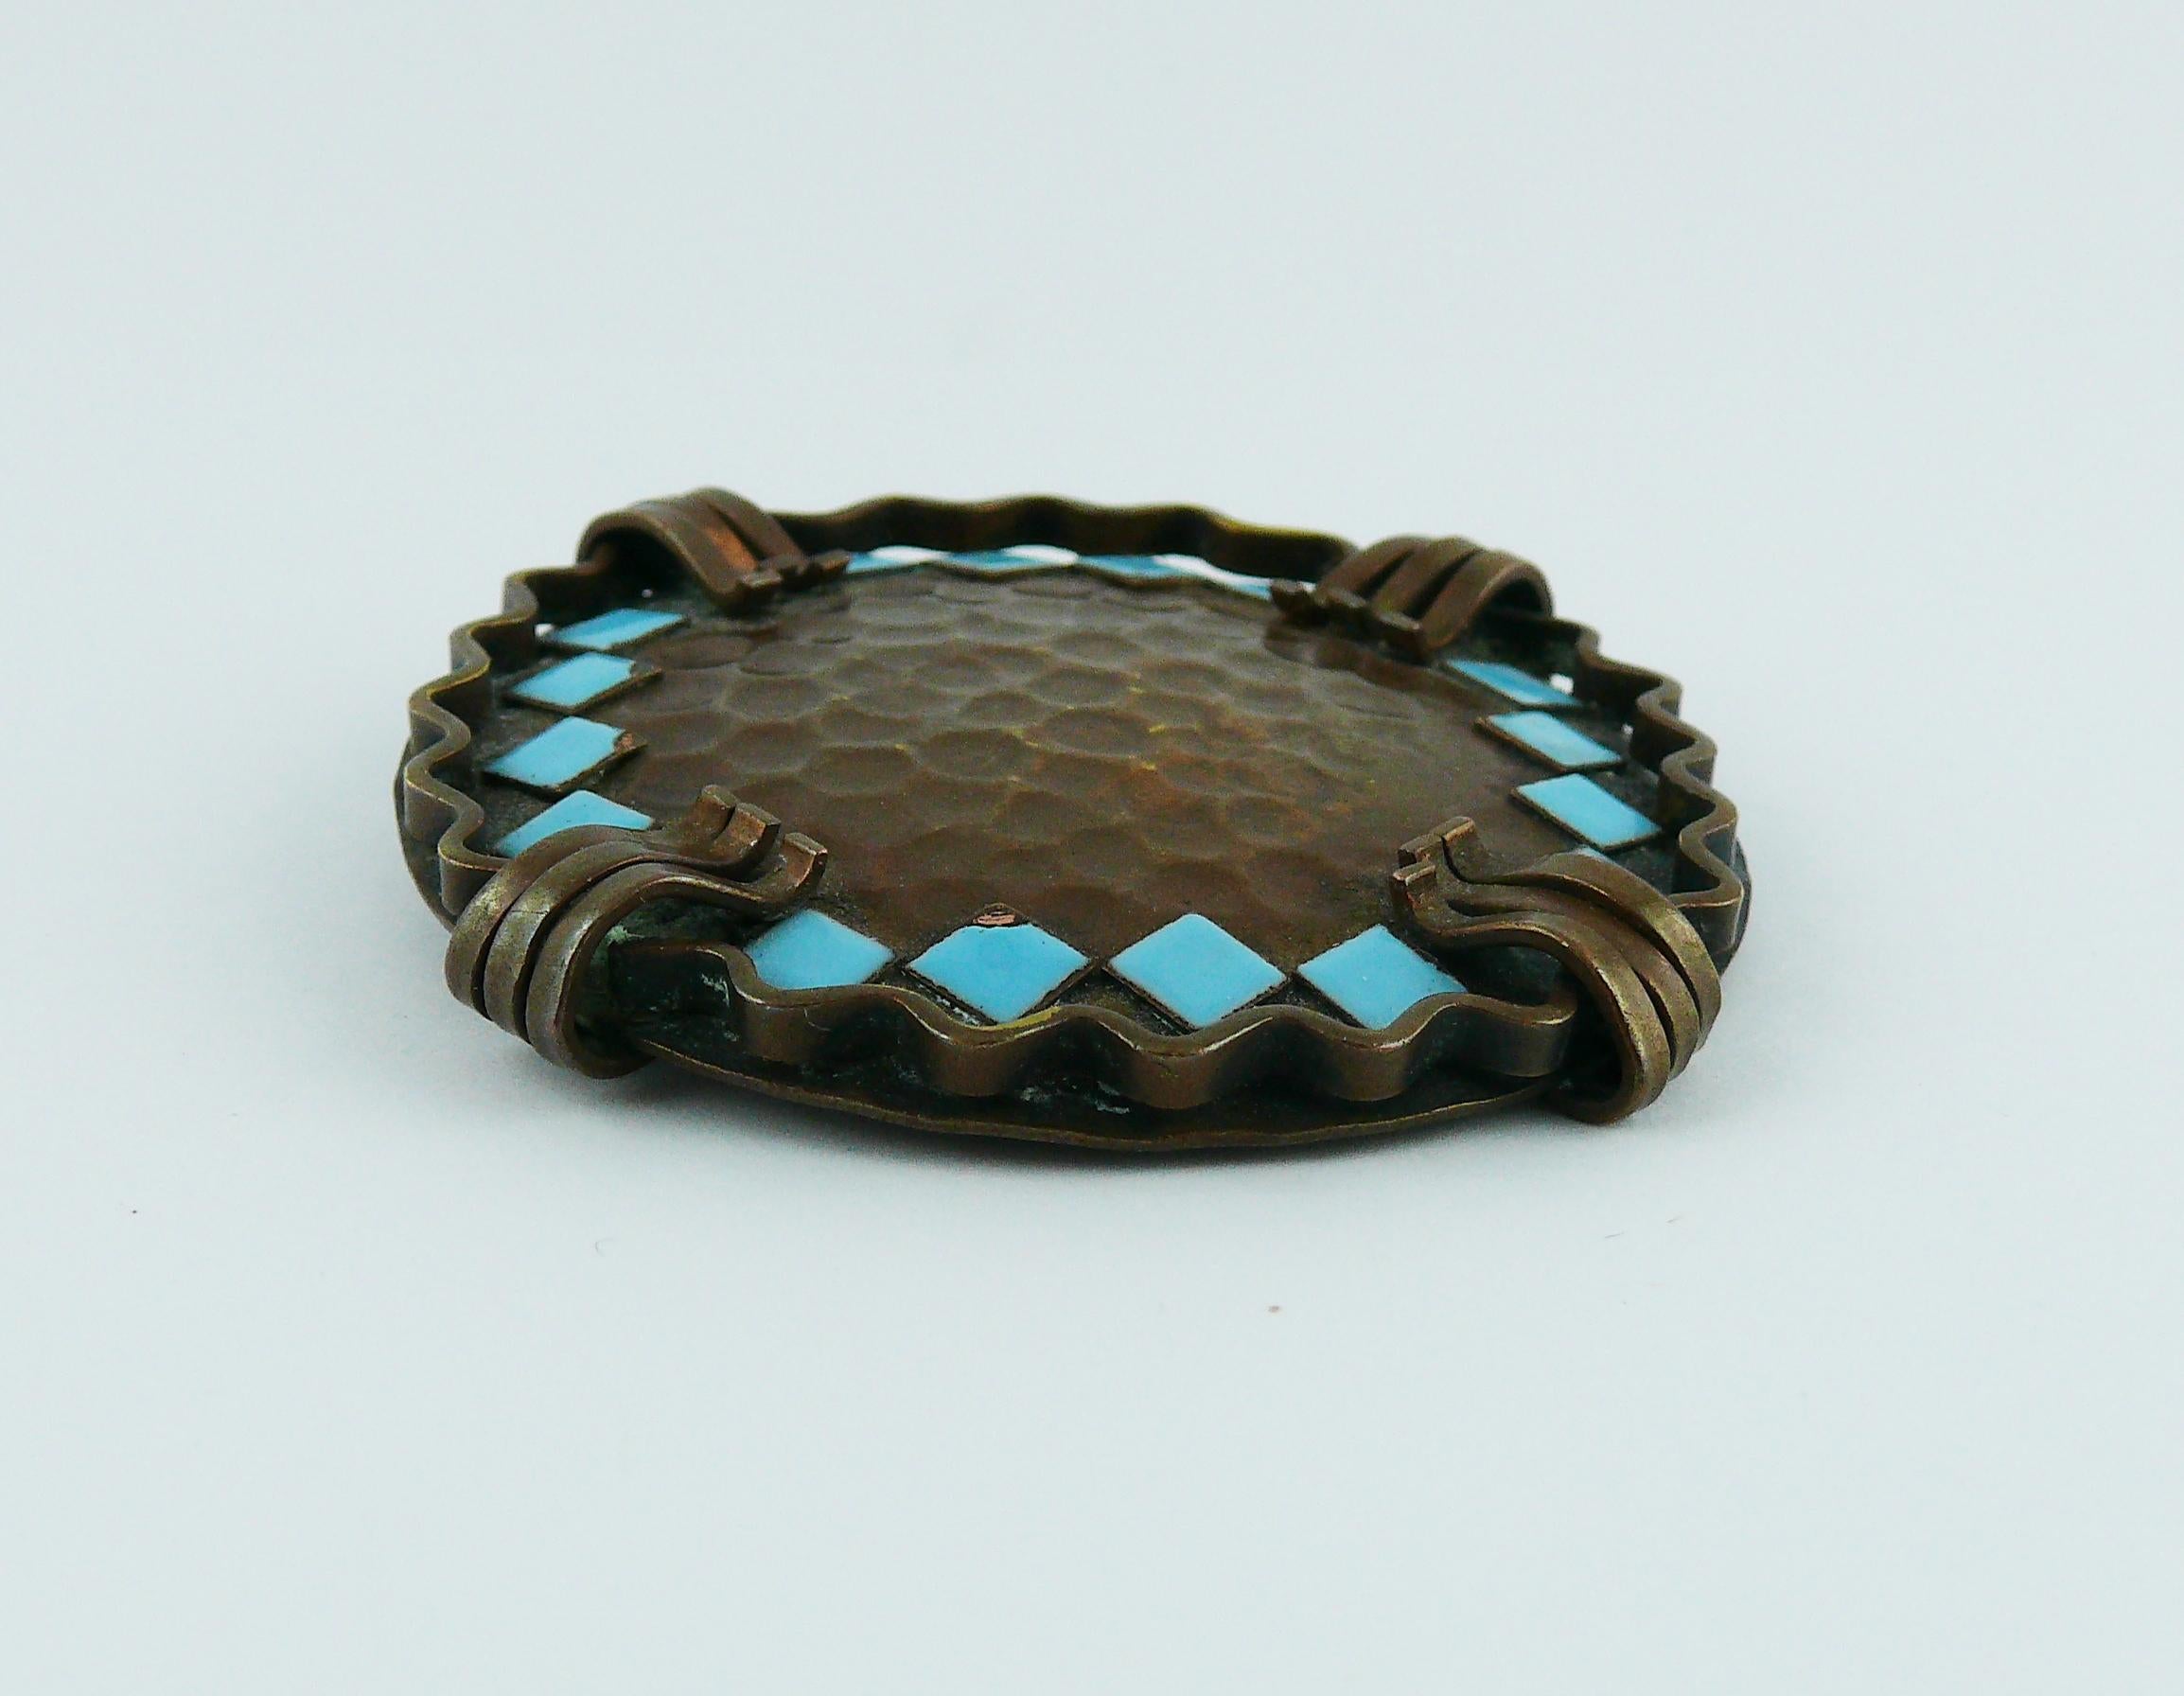 JEAN AUGIS vintage rare ART DECO brooch in hammered copperware featuring 16 enameled turquoise cabochons.

Embossed JEAN AUGIS.

Indicative measurements : diameter 5.3 cm (2.09 inches).

JEWELRY CONDITION CHART
- New or never worn : item is in